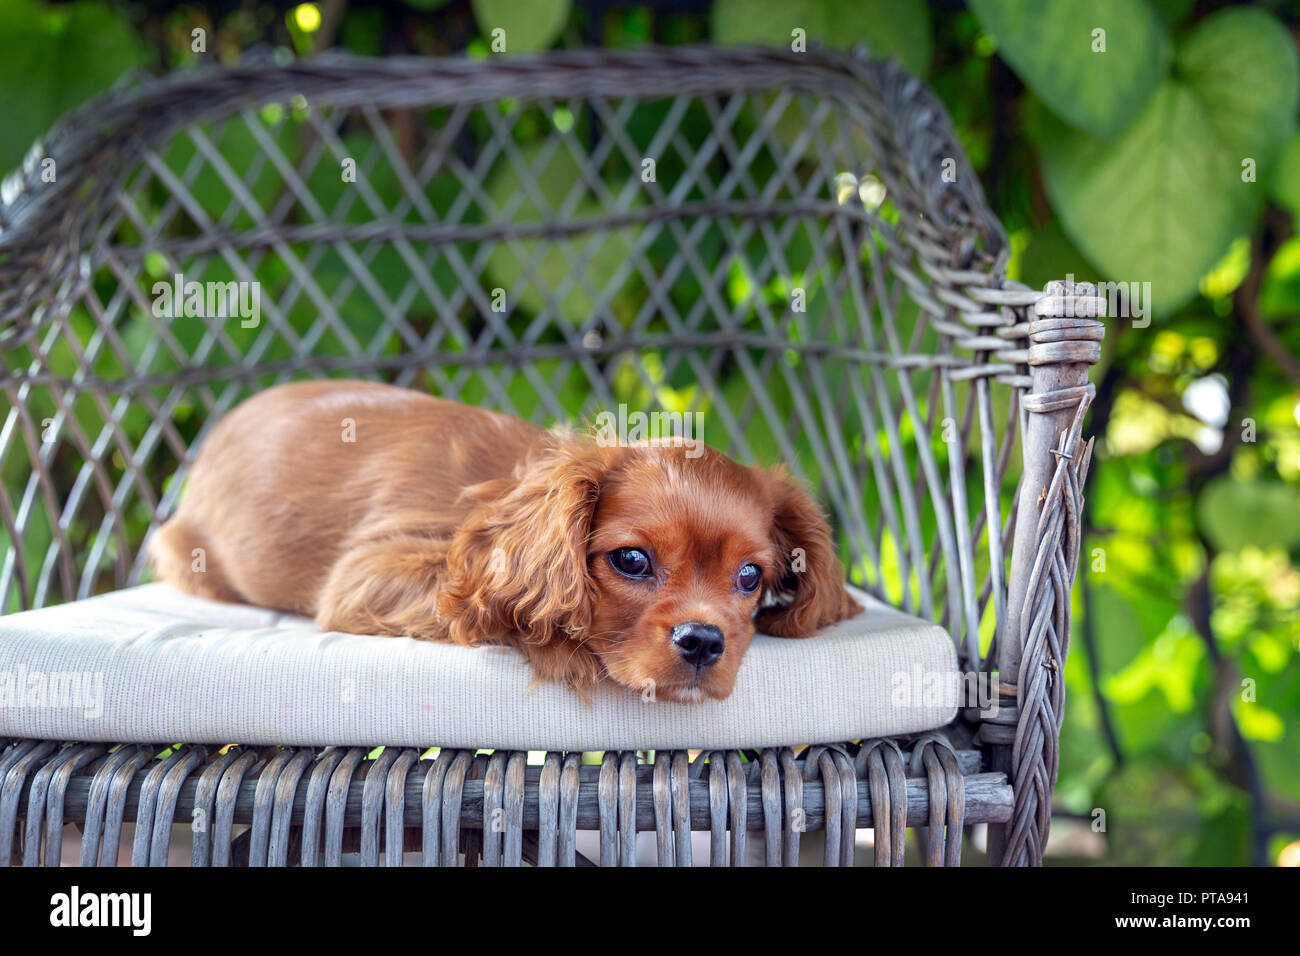 Cute puppy napping on the chair in the garden Stock Photo